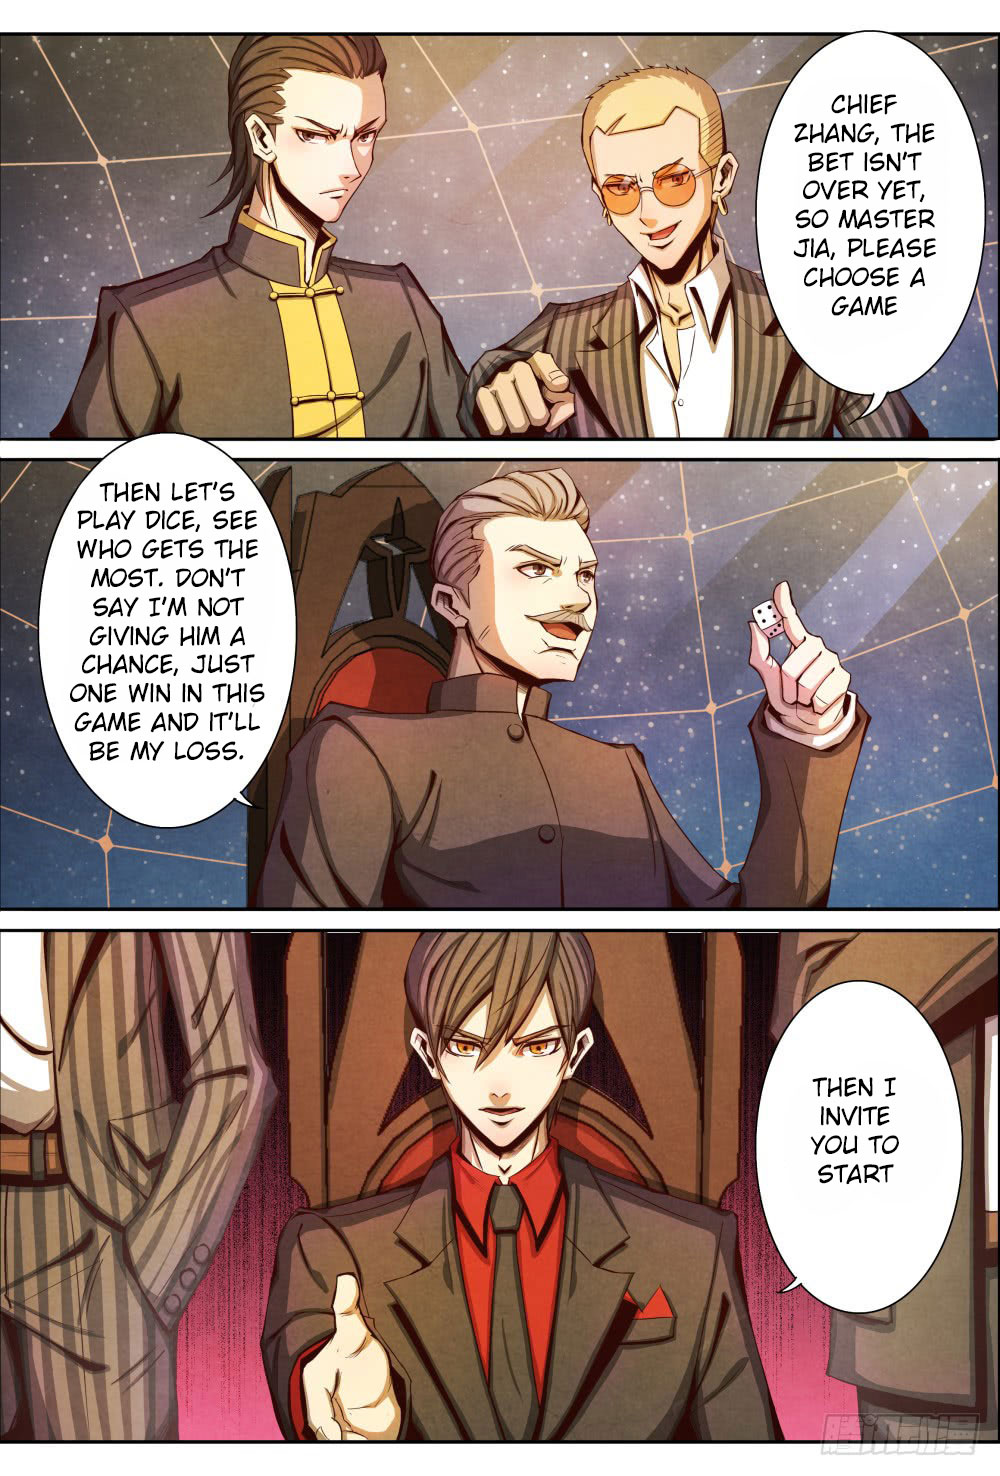 Return From the World of Immortals Vol. 1 Ch. 8 the confrontation